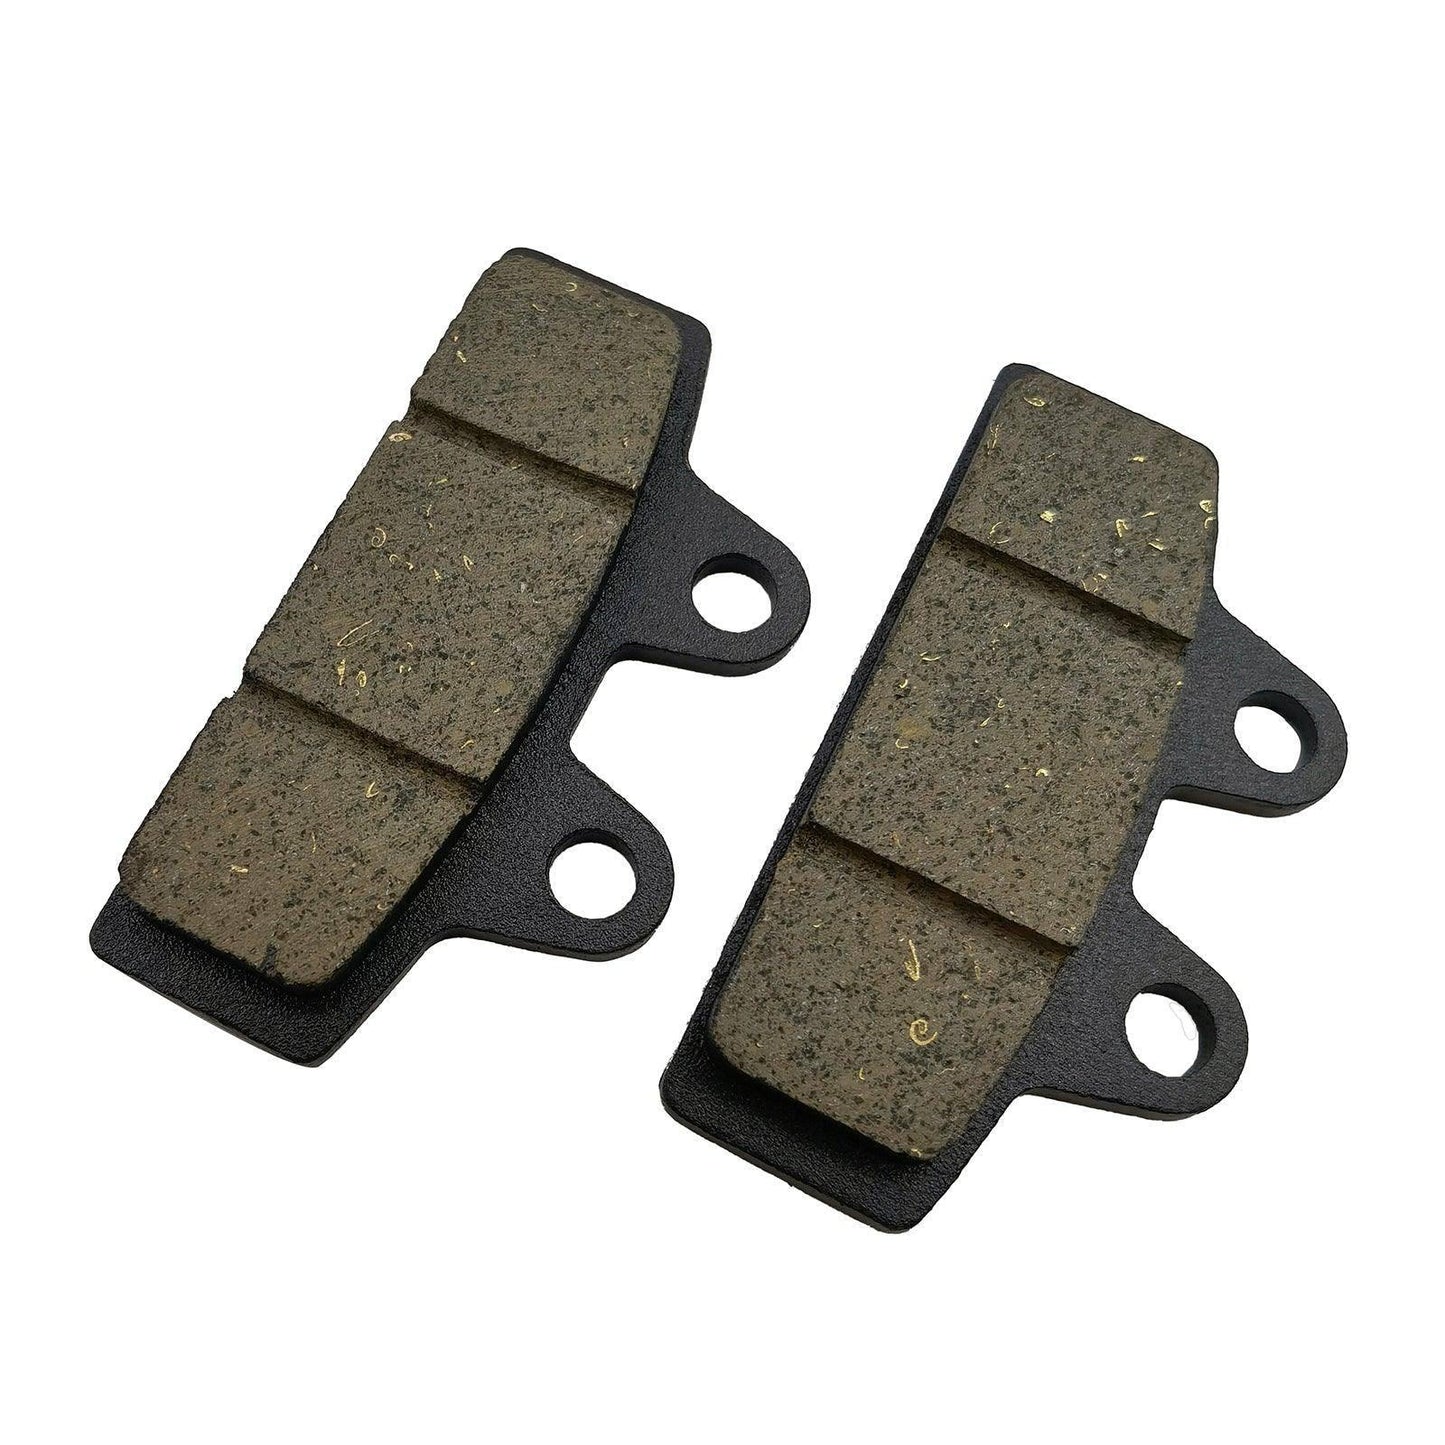 Pair of Brake Pads for M1 Chopper - FatWheelScoot